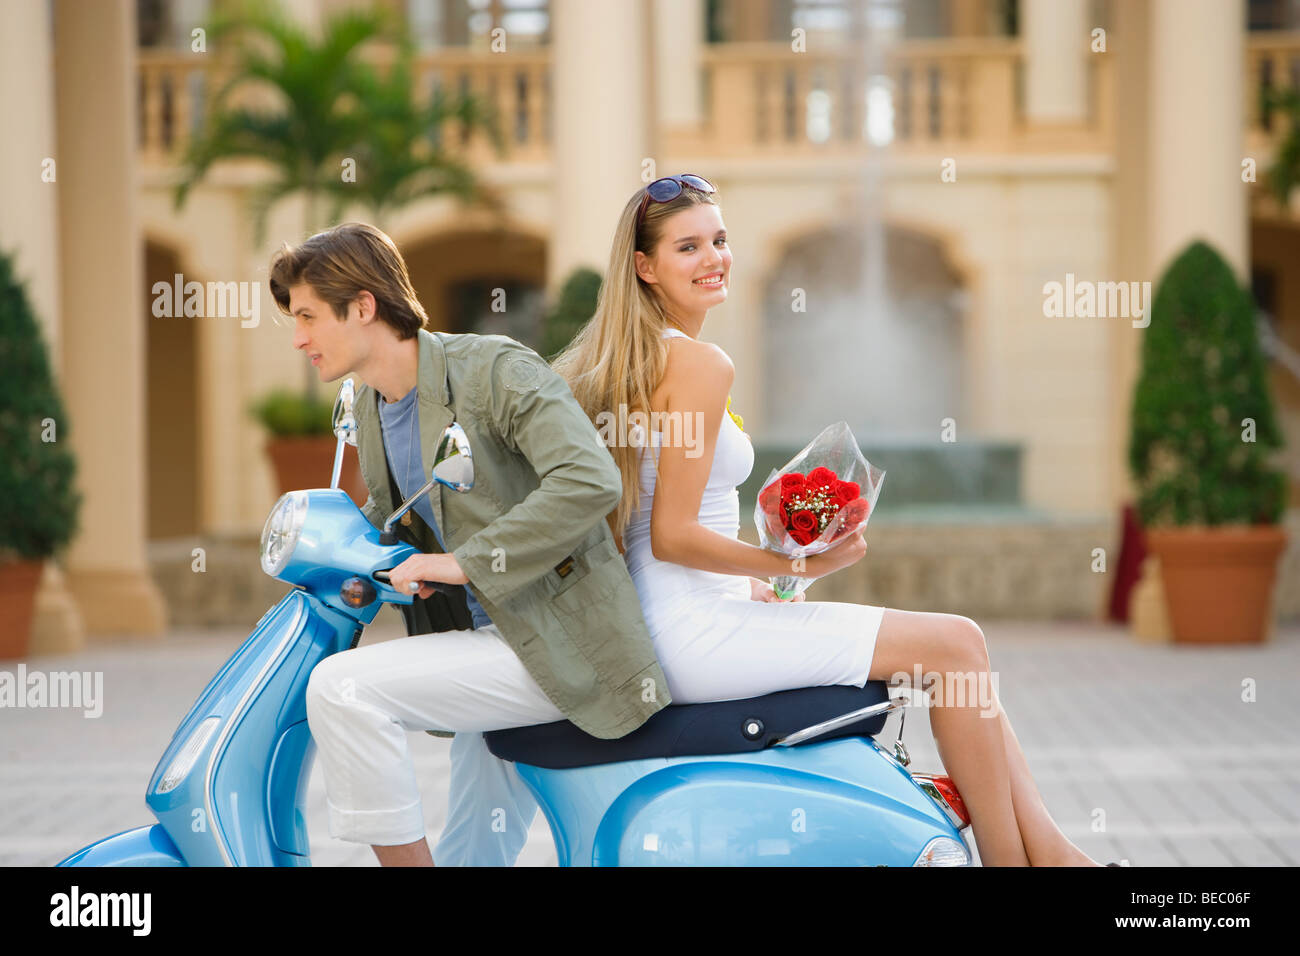 Couple sitting on a moped, Biltmore Hotel, Coral Gables, Florida, USA Stock Photo